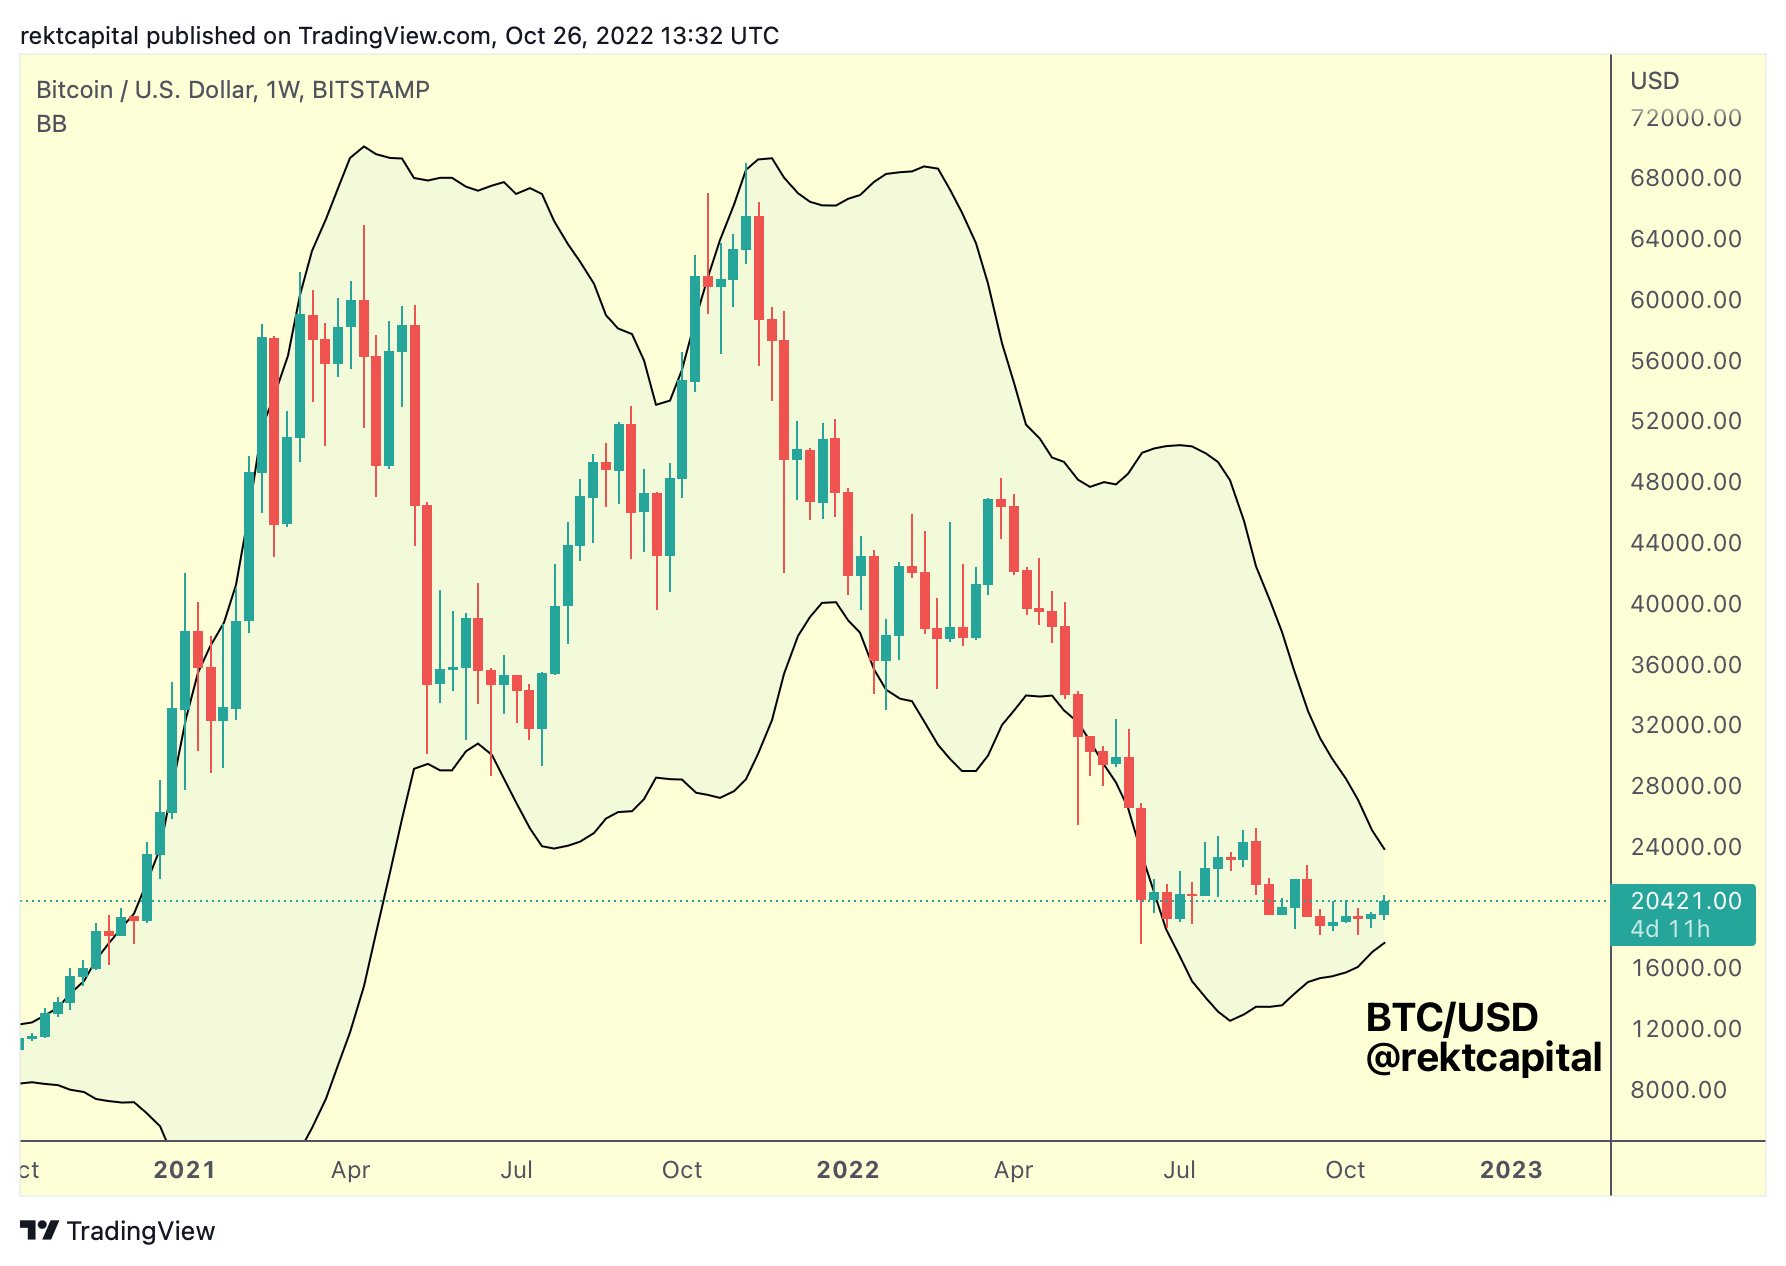 BTC/USDT price chart with Bollinger Bands